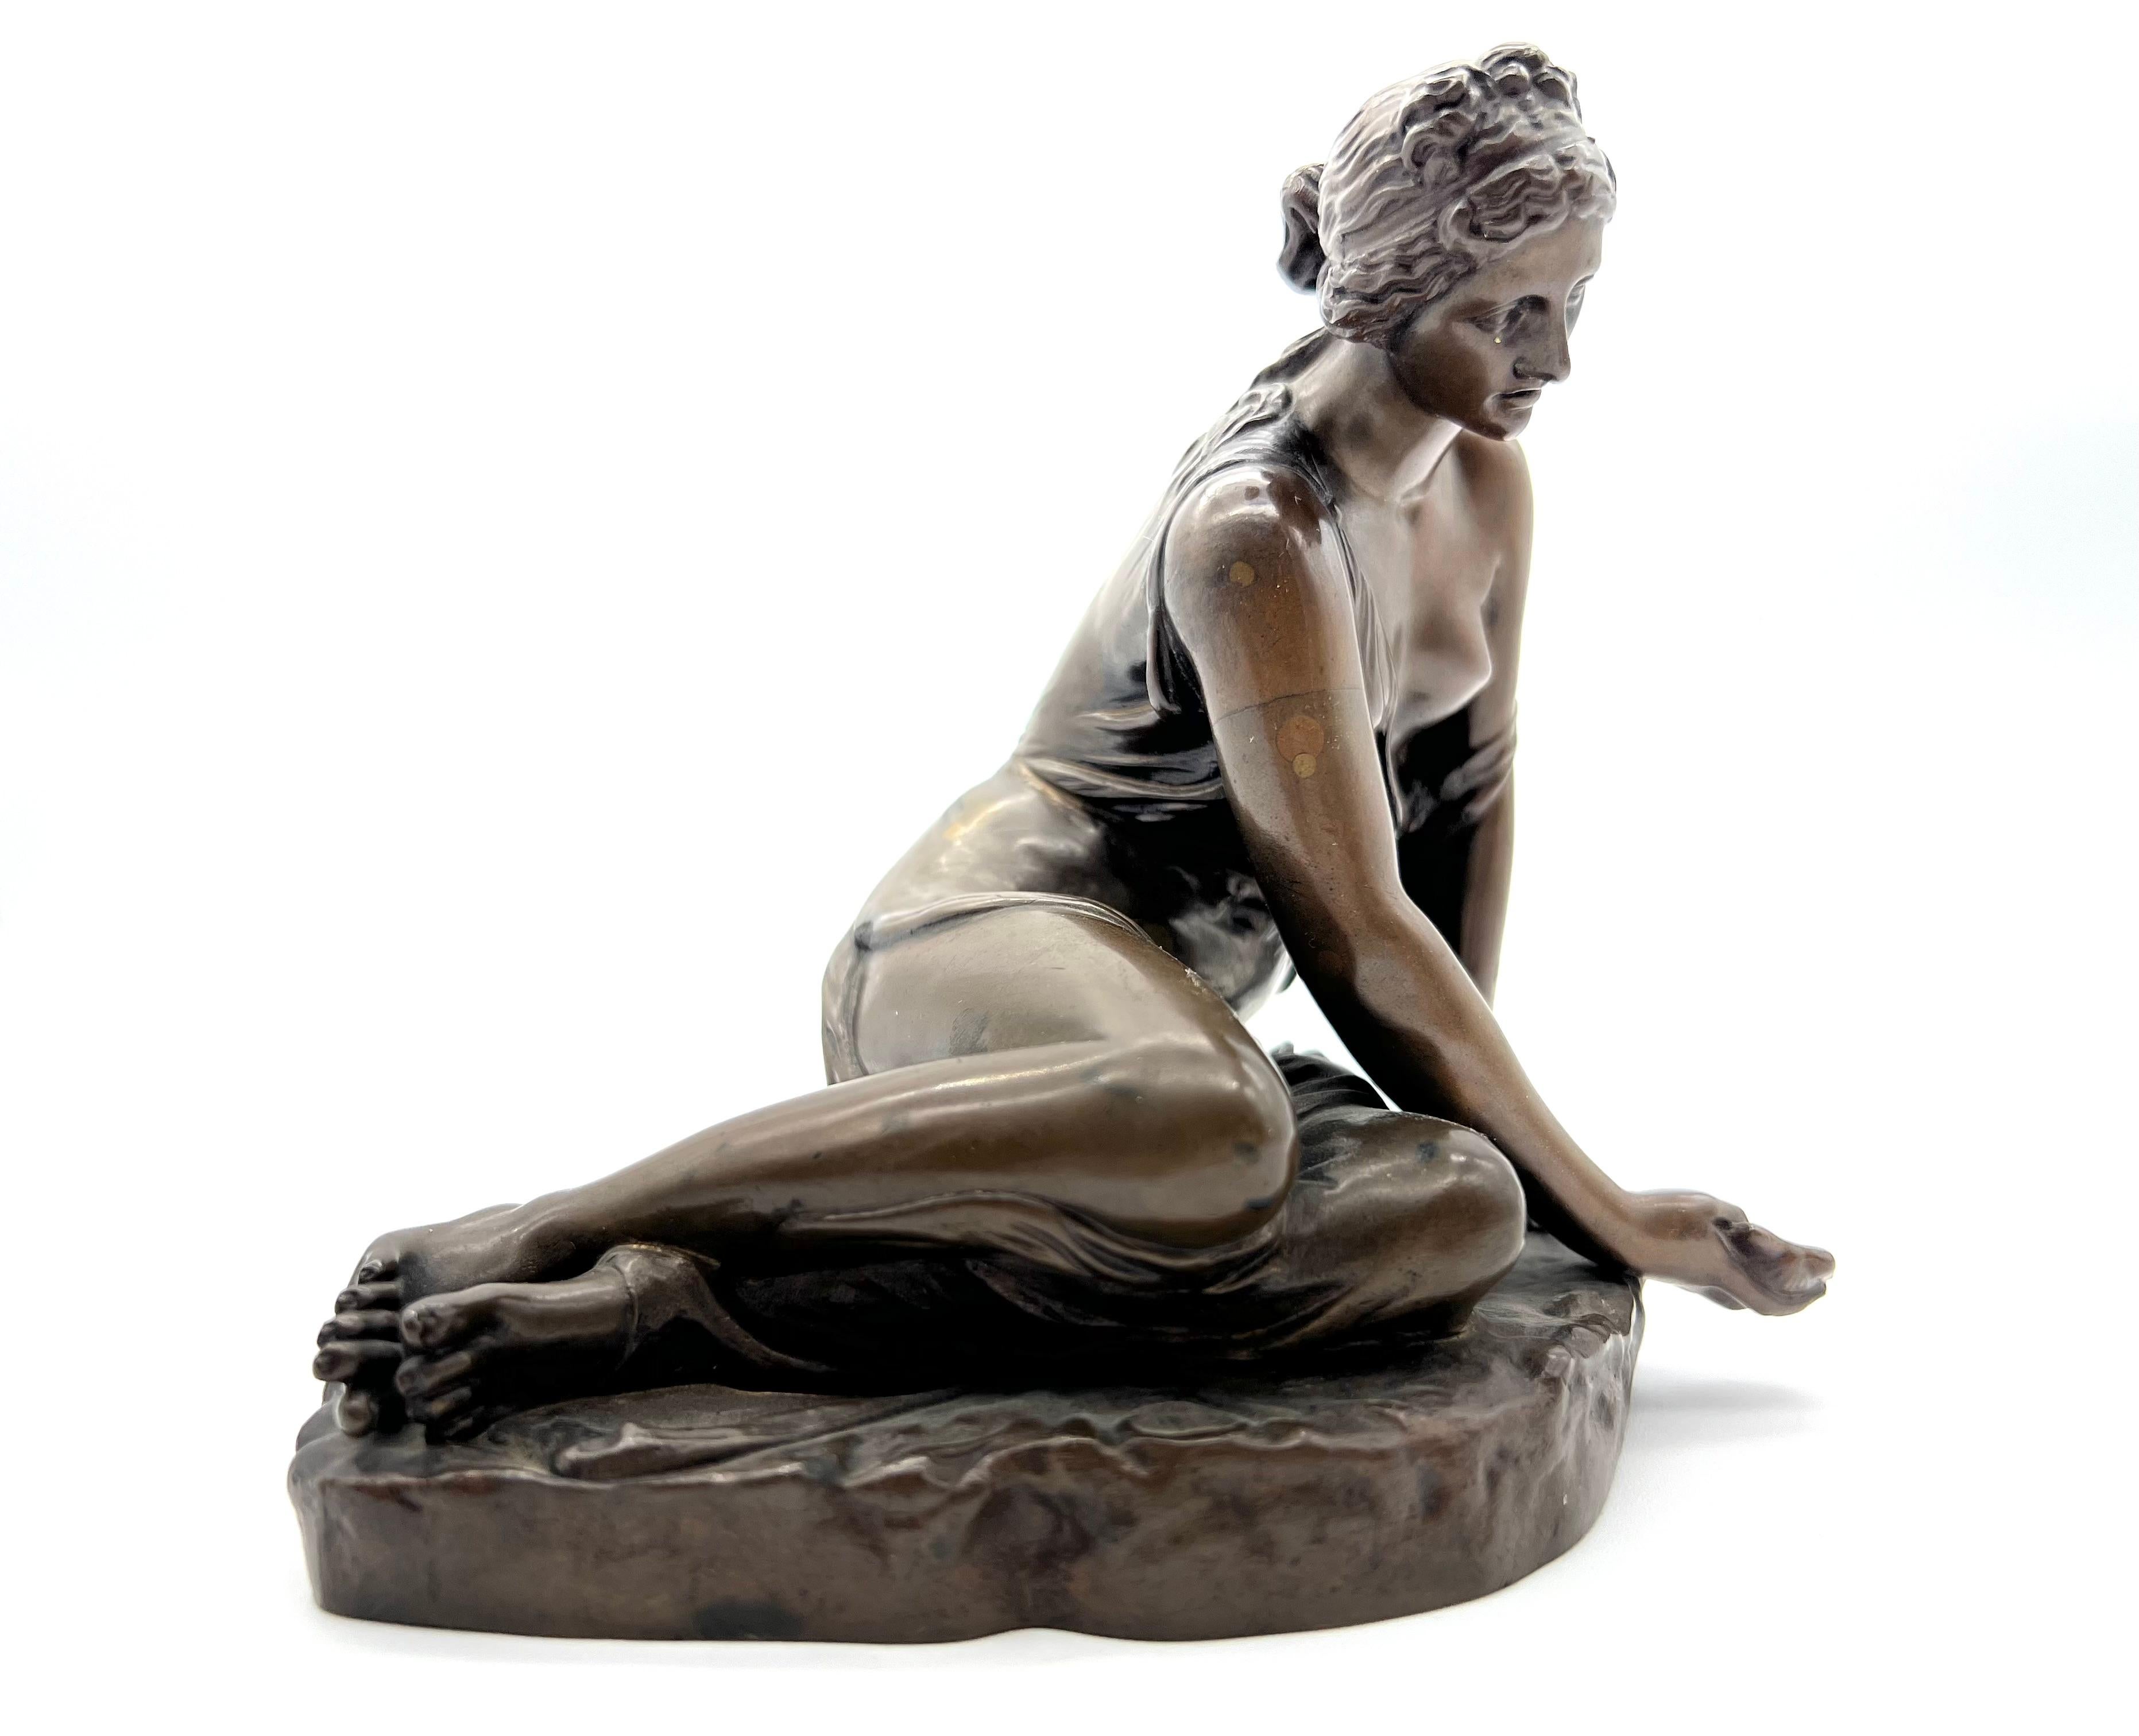 This bronze sculpture representing a nymph with the Borghese shell of the 19th century and was made after the sculptor Antoine Coysevox (1640-1720).
The nymph with the Borghese shell was one of the sculptures present in the garden of Versailles on